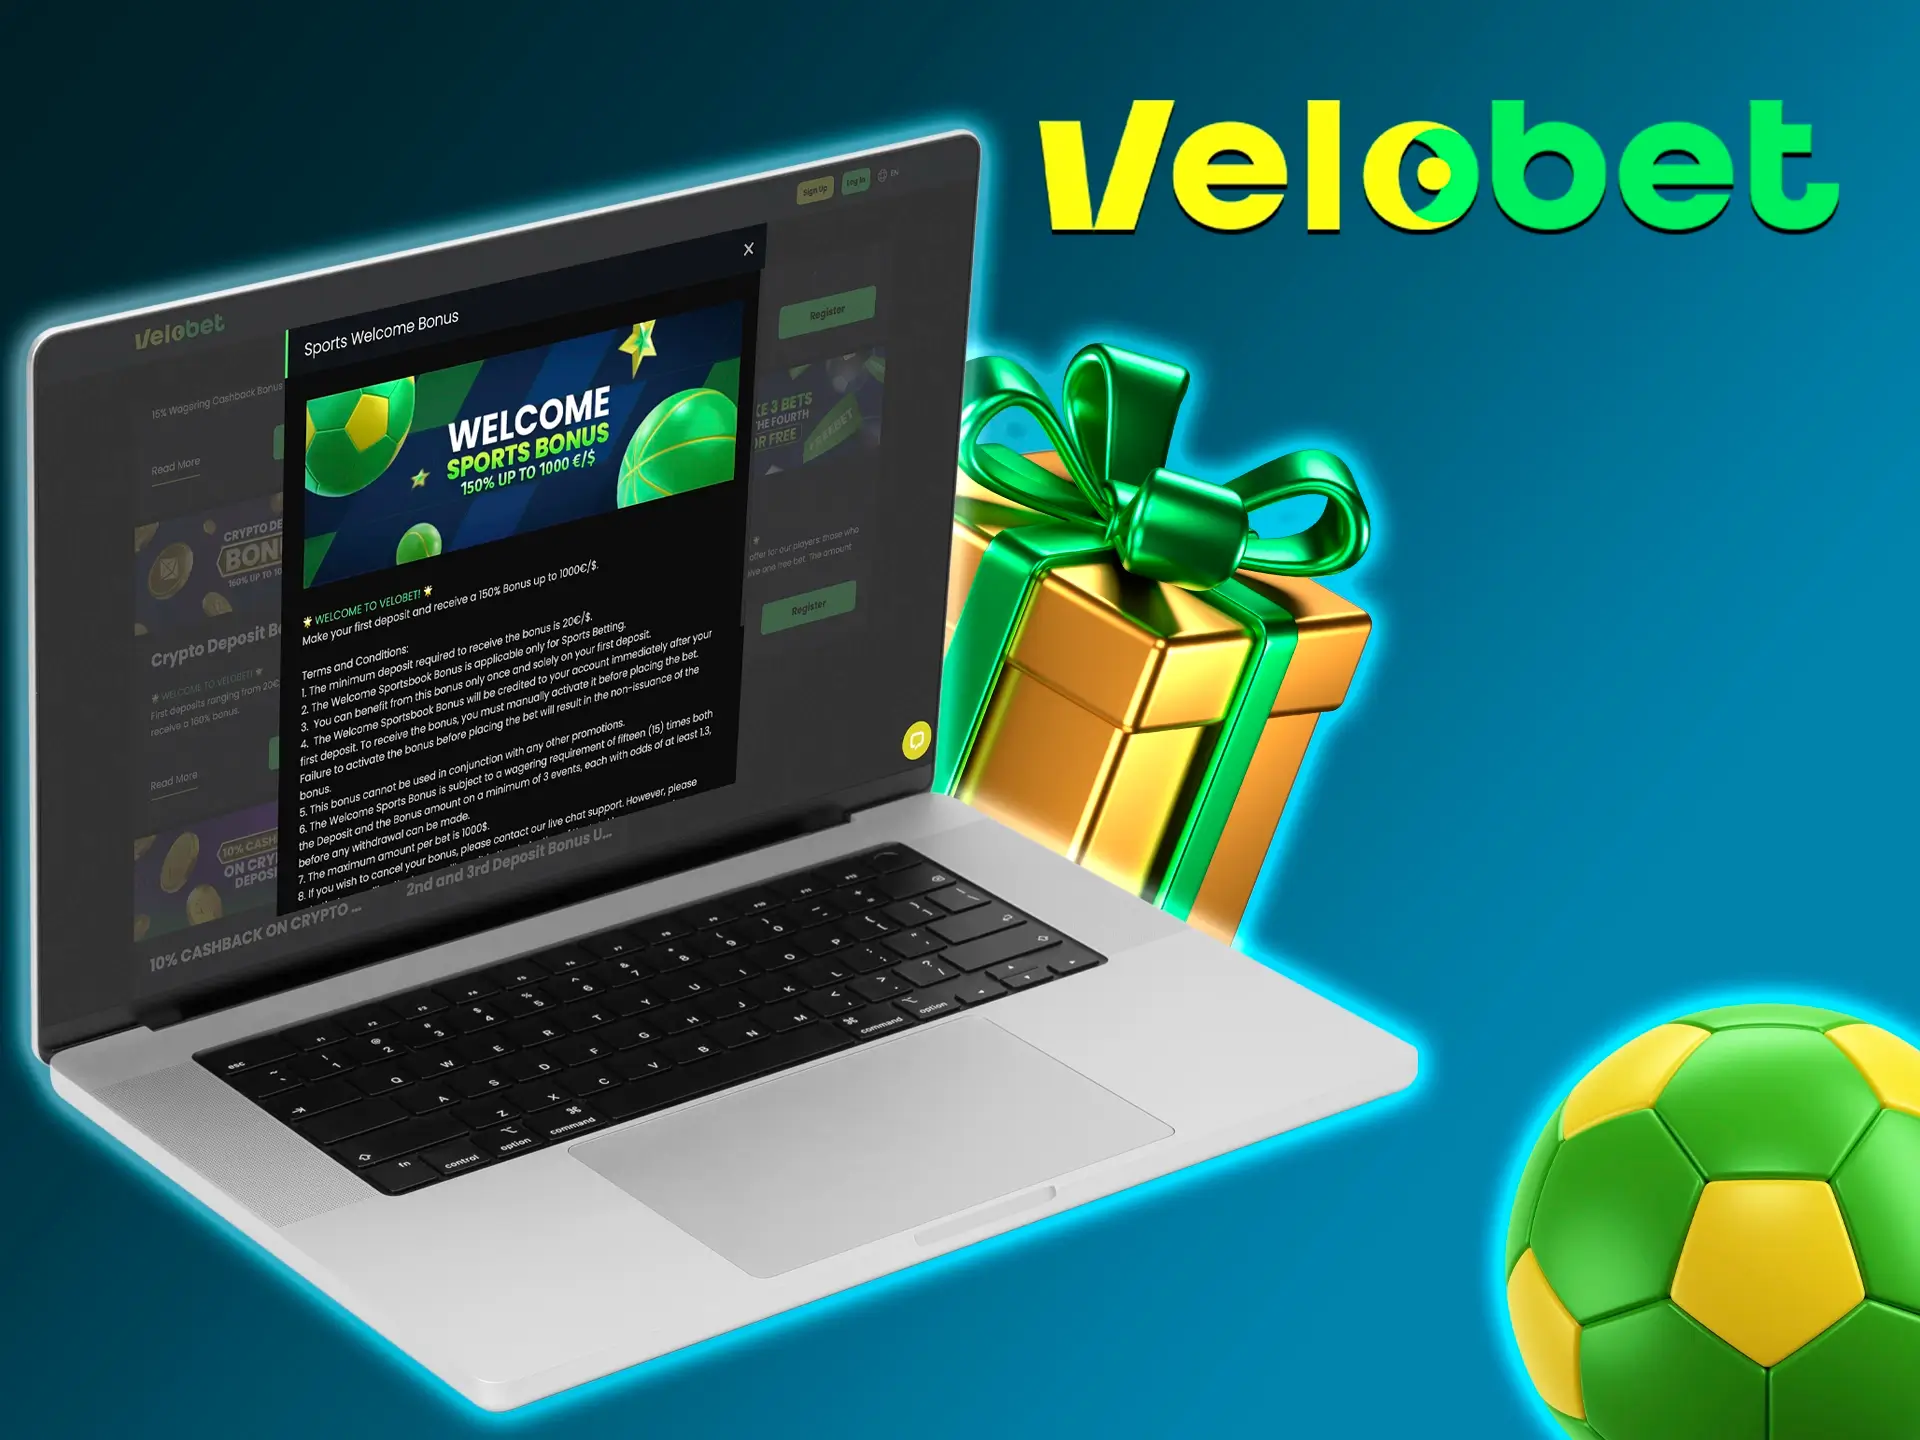 The welcome bonus gives you a great opportunity to multiply your bet on your favourite discipline at Velobet.